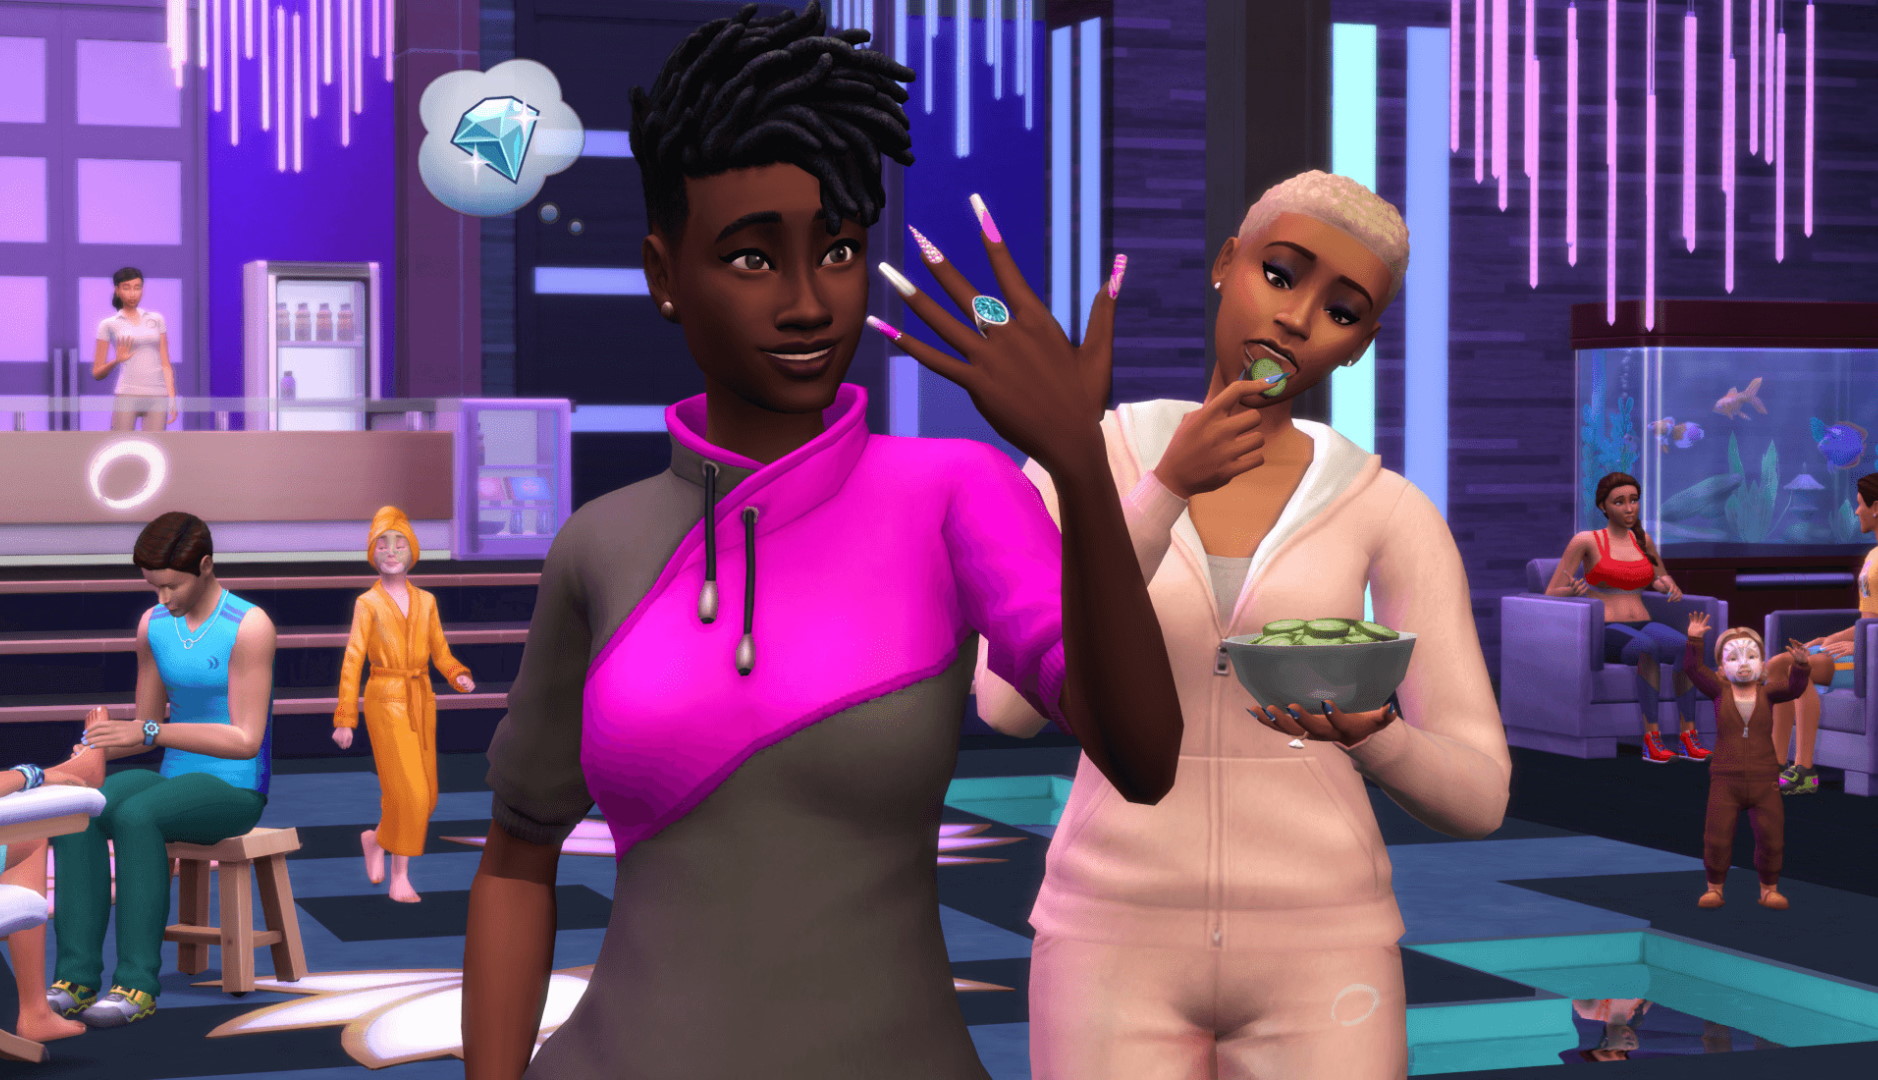 the sims 4 able content free